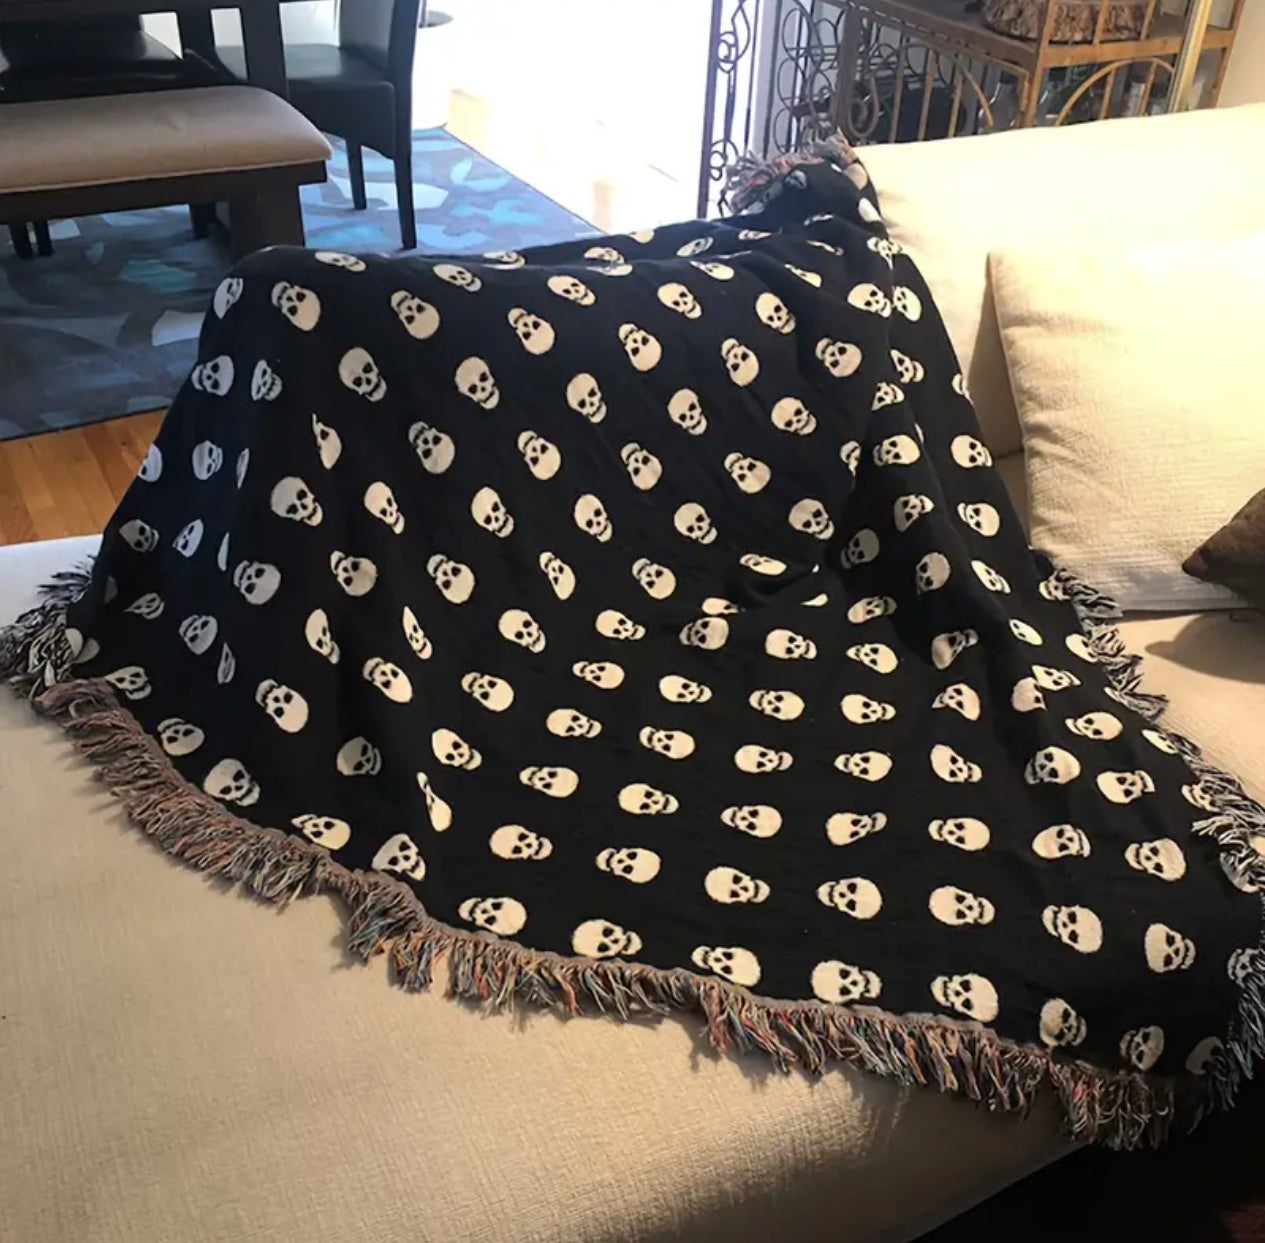 Woven Double-Sided Skull Tassel Blanket — 47 x 59 inches